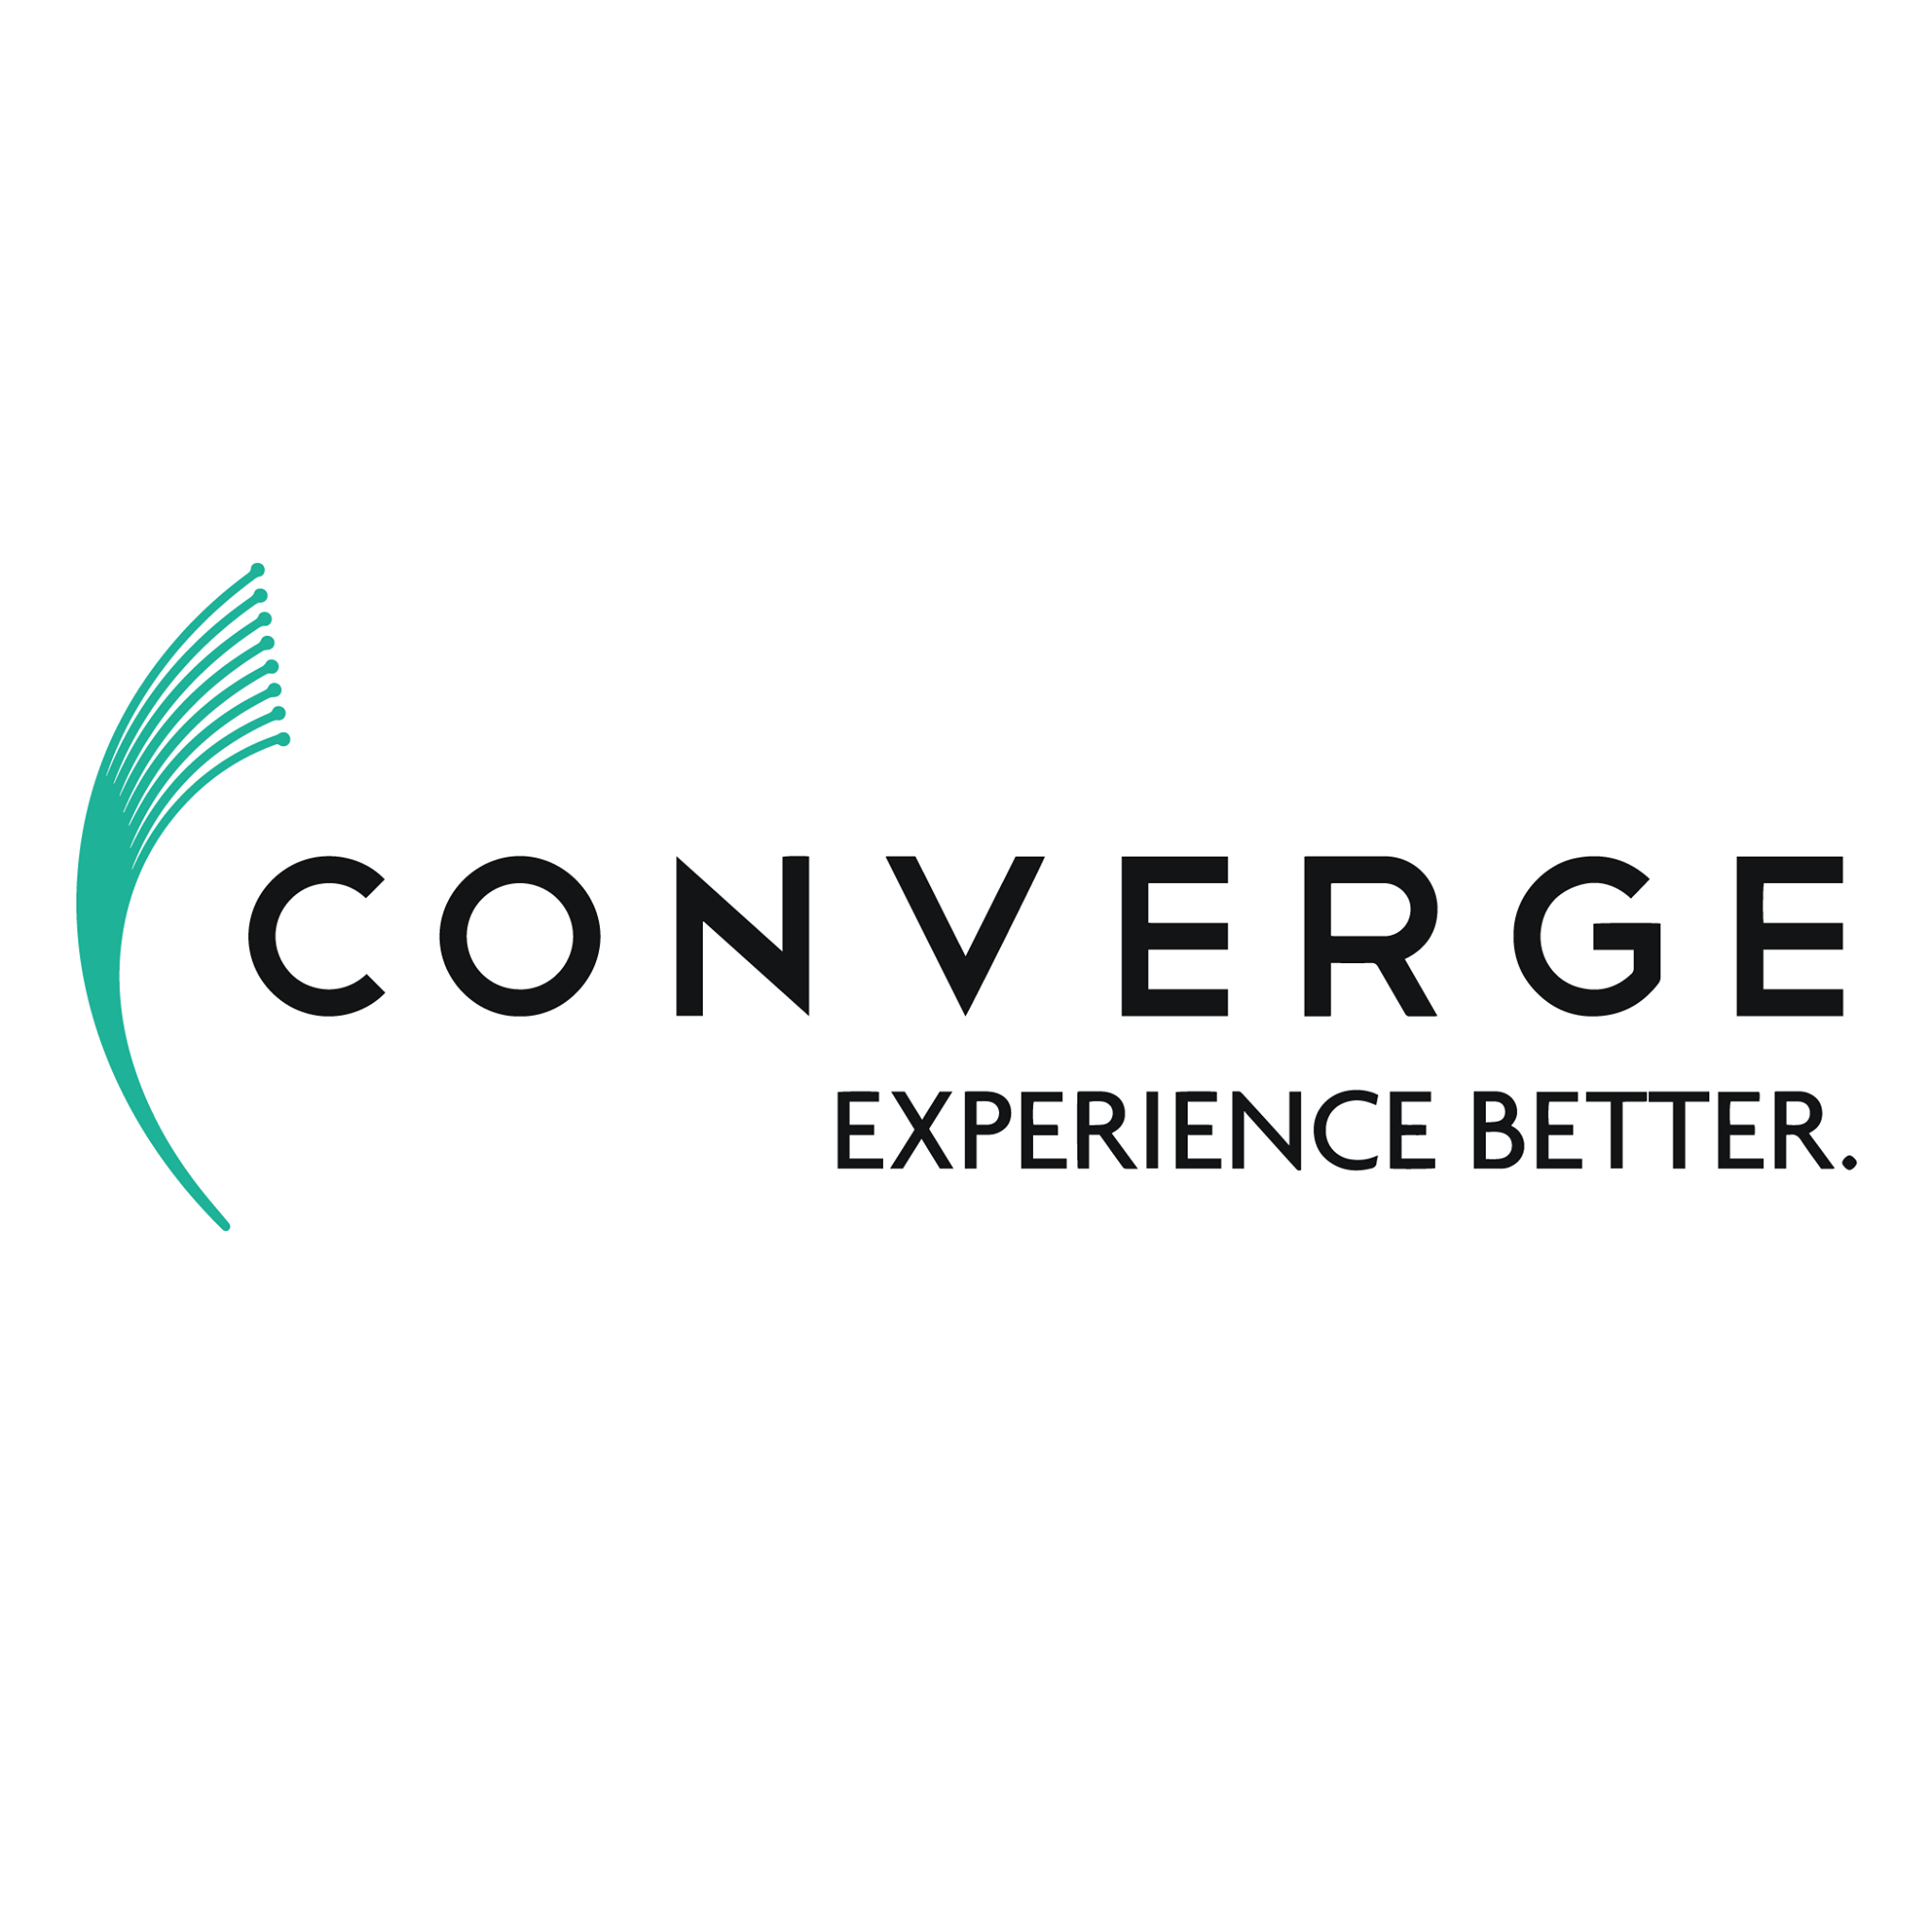 Converge to be traded in US markets via ADRs